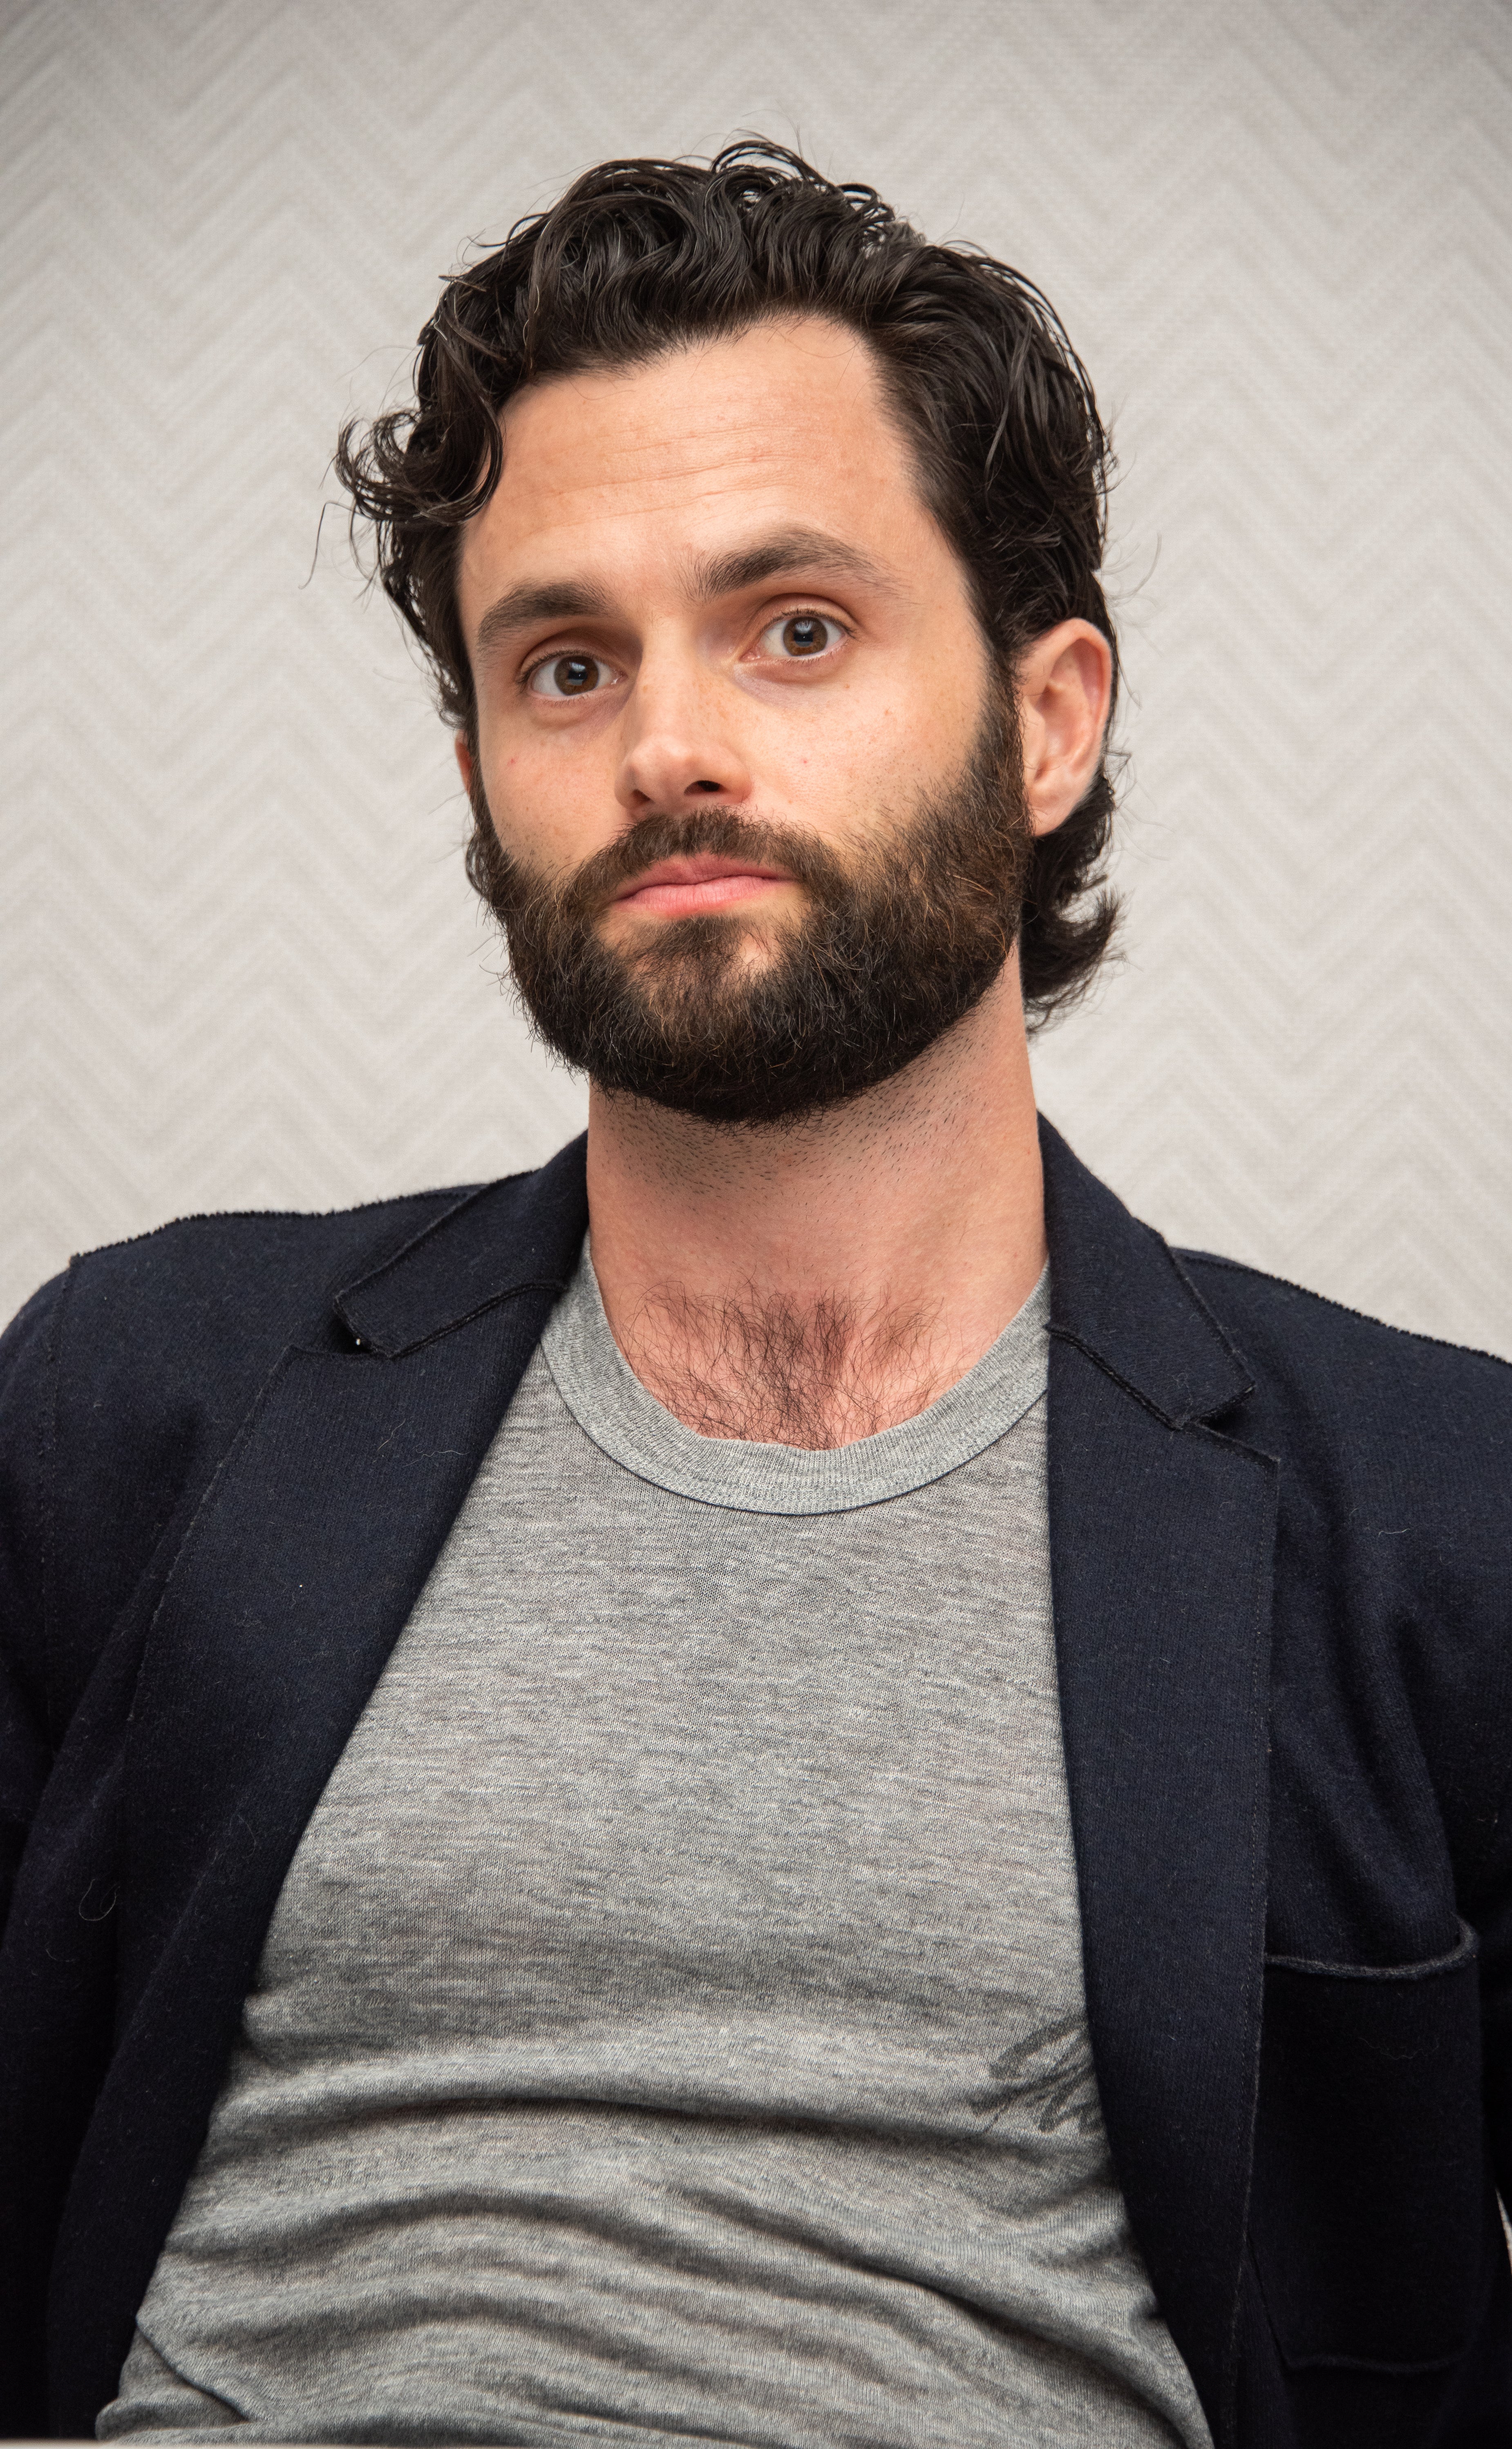 Penn with beard and curly hair wearing a blazer over a T-shirt, seated and looking at the camera